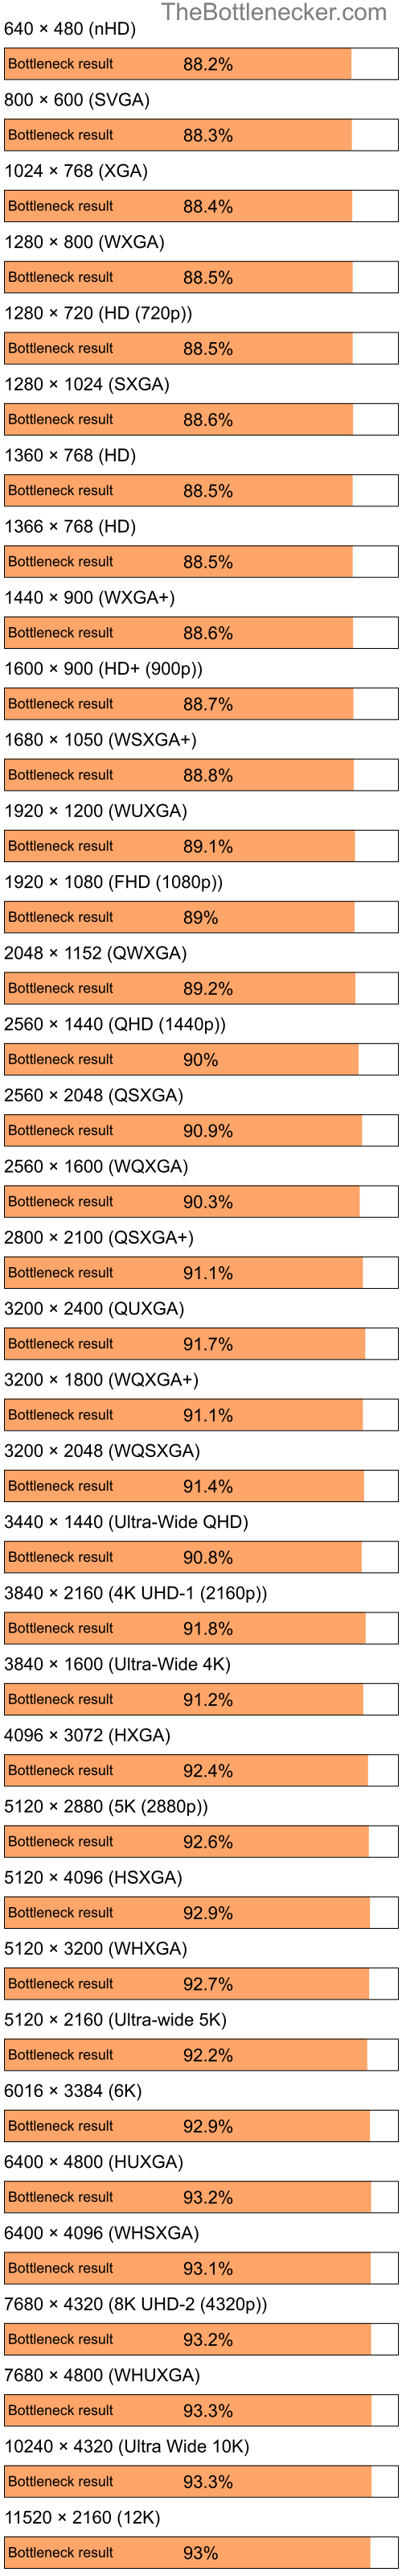 Bottleneck results by resolution for Intel Pentium 4 and AMD Mobility Radeon 9200 in Processor Intense Tasks